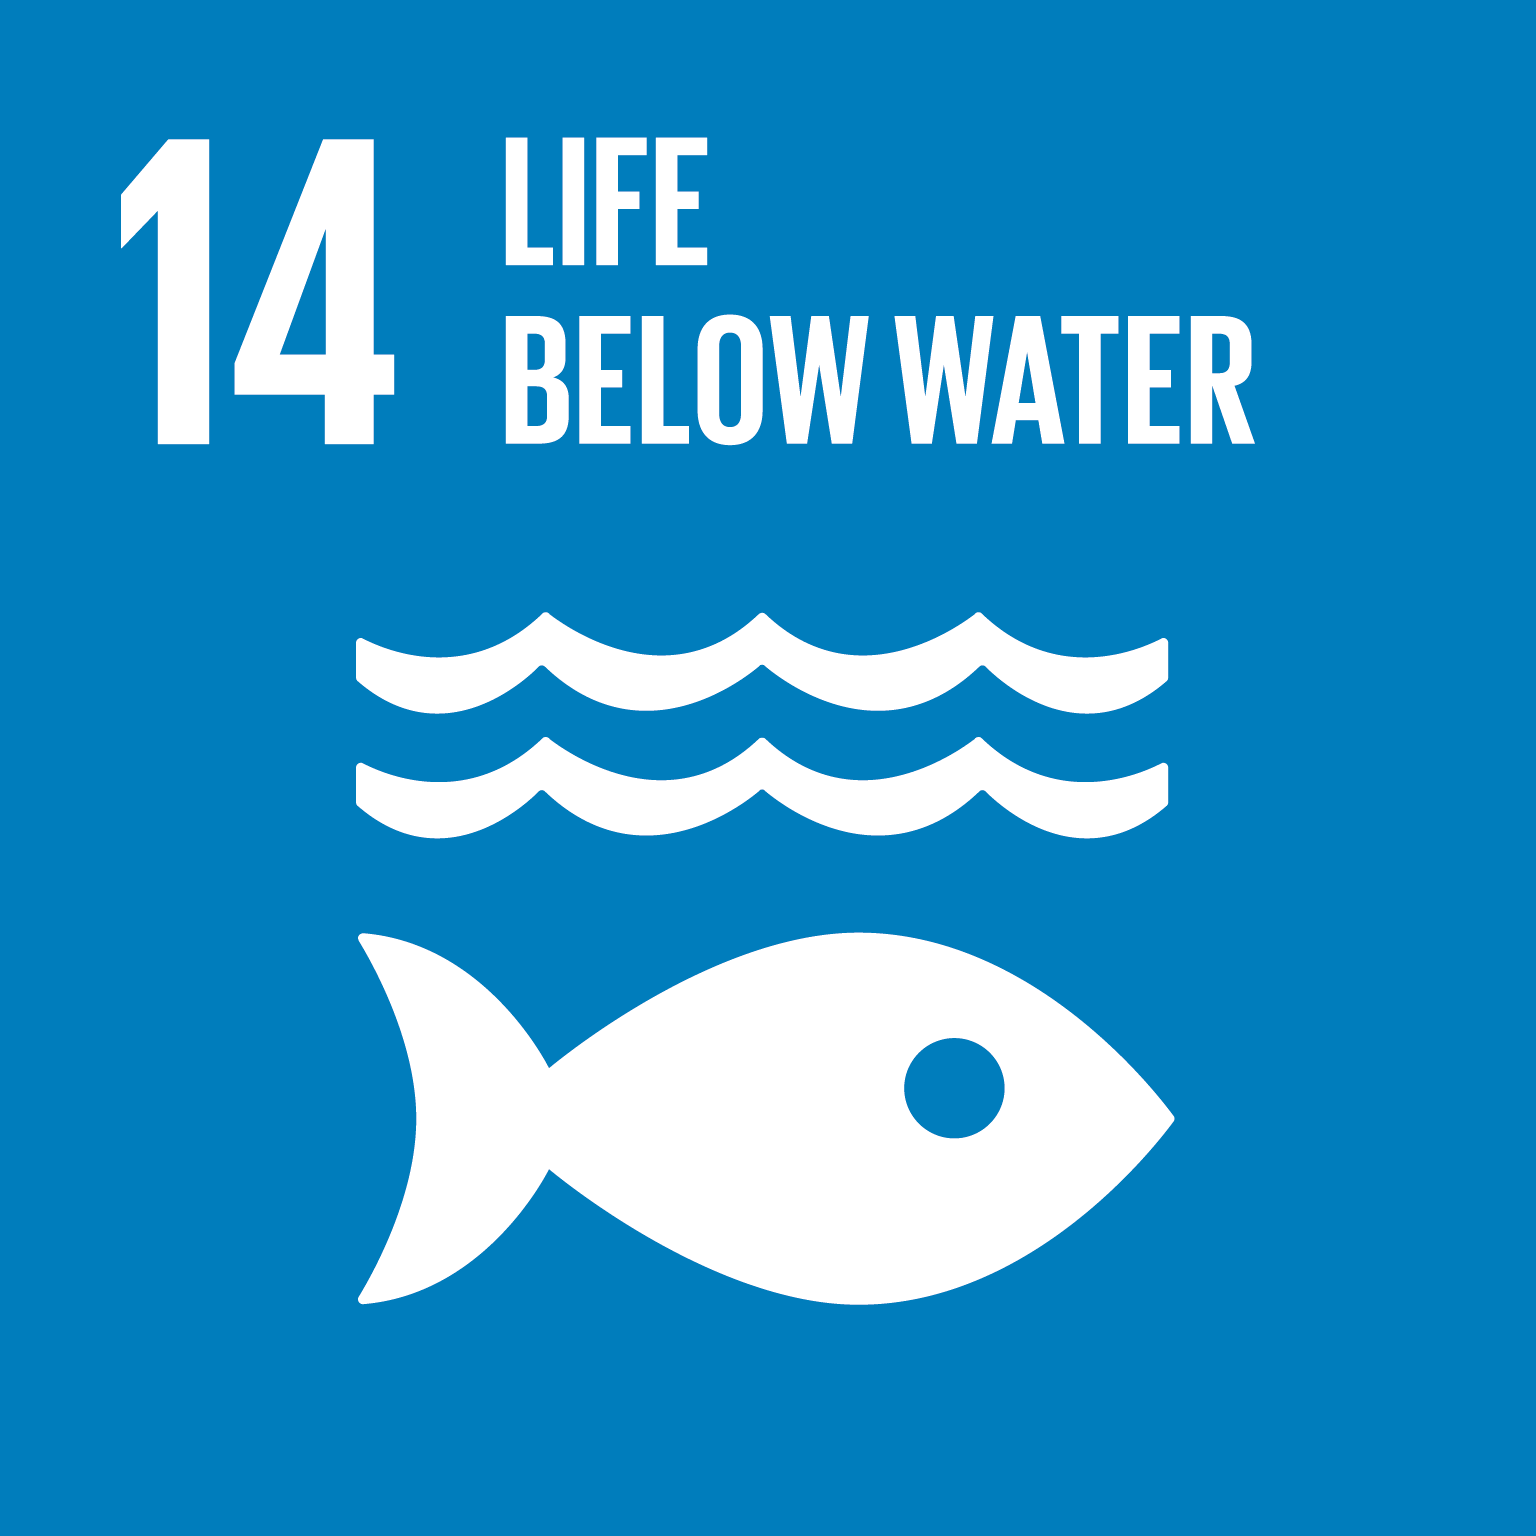 Goal 14: Life Below Water - Conserve and sustainably use the oceans, seas and marine resources for sustainable development